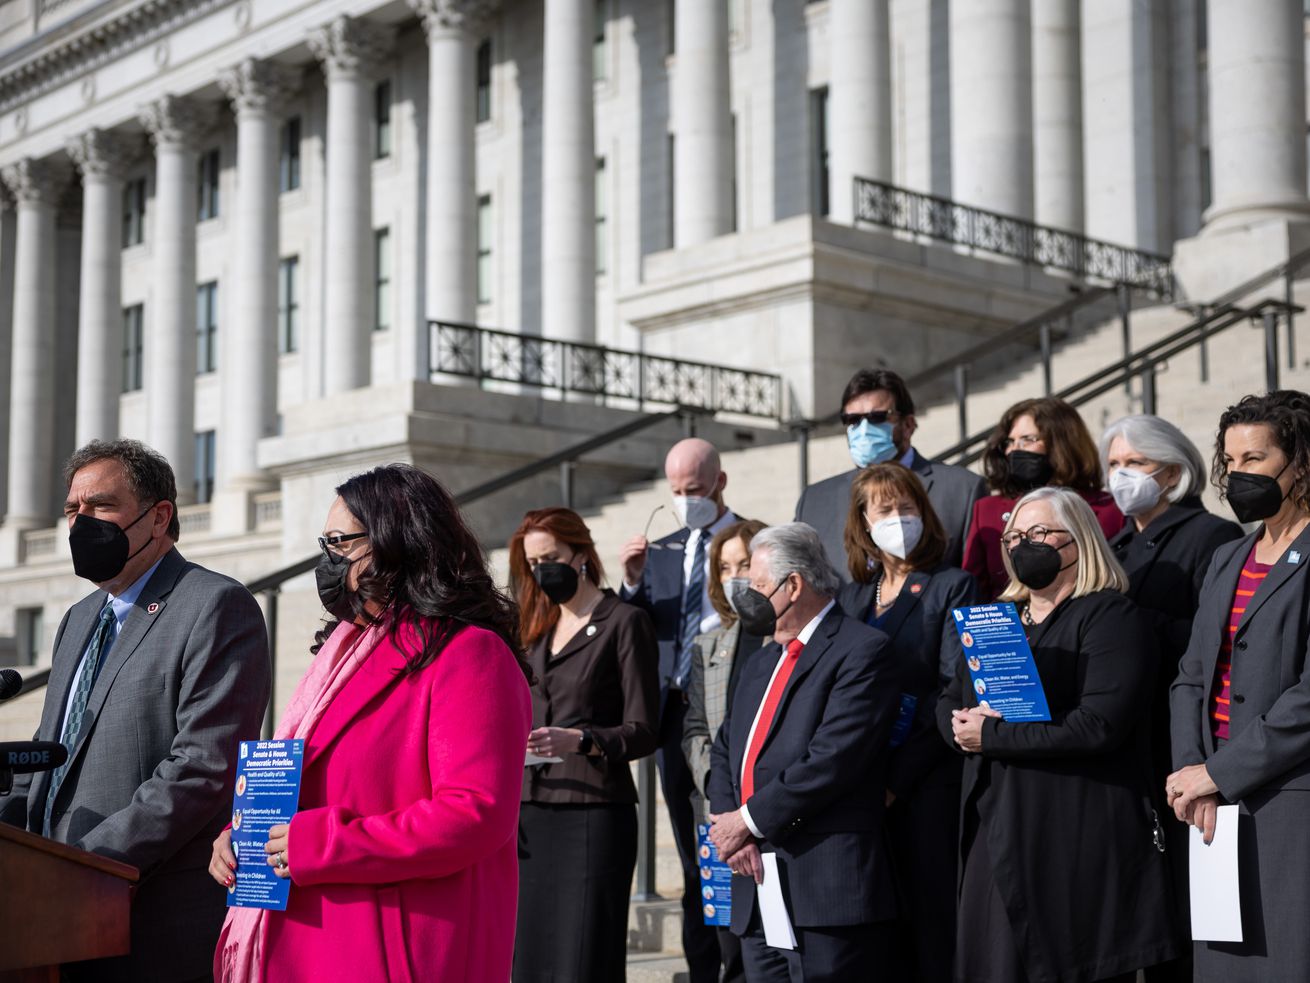 House Minority Leader Brian King, D-Salt Lake City, and Senate Minority Whip Luz Escamilla, D-Salt Lake City, are flanked by members of their party during a press conference outlining the Democrats’ legislative priorities for the year at the Capitol.